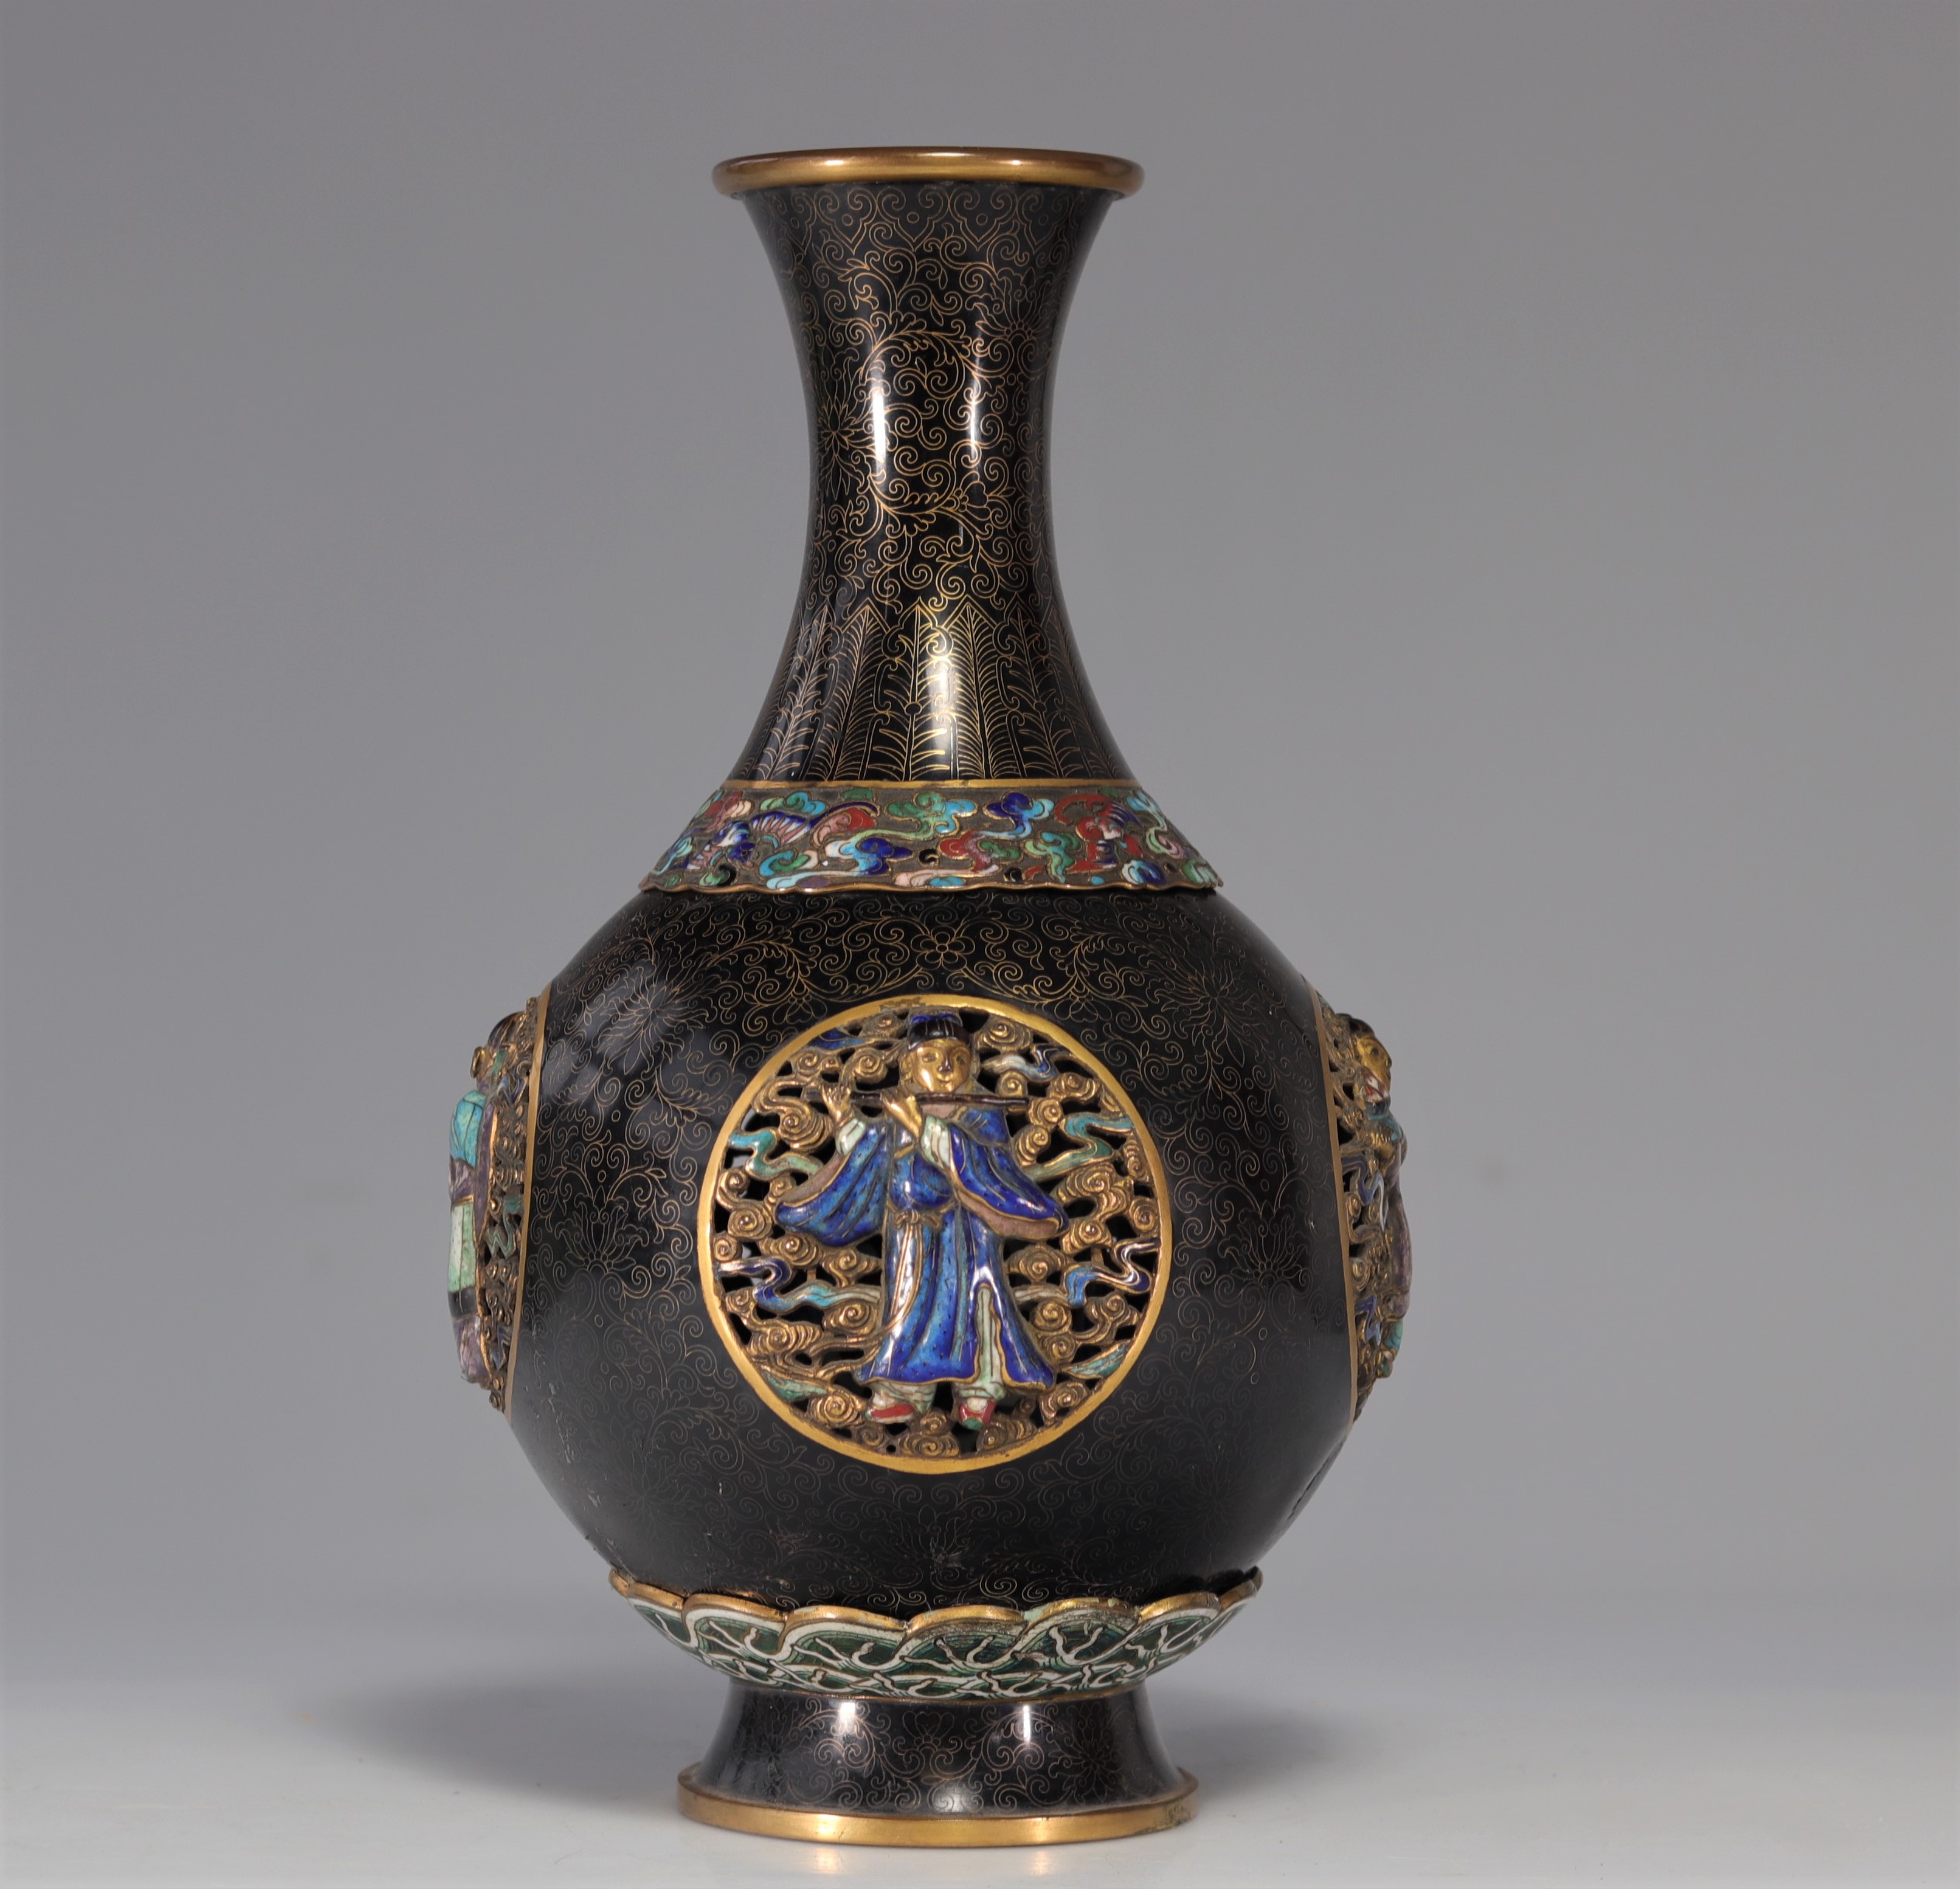 Cloisonne bronze vase decorated with Qing period figures - Image 5 of 9